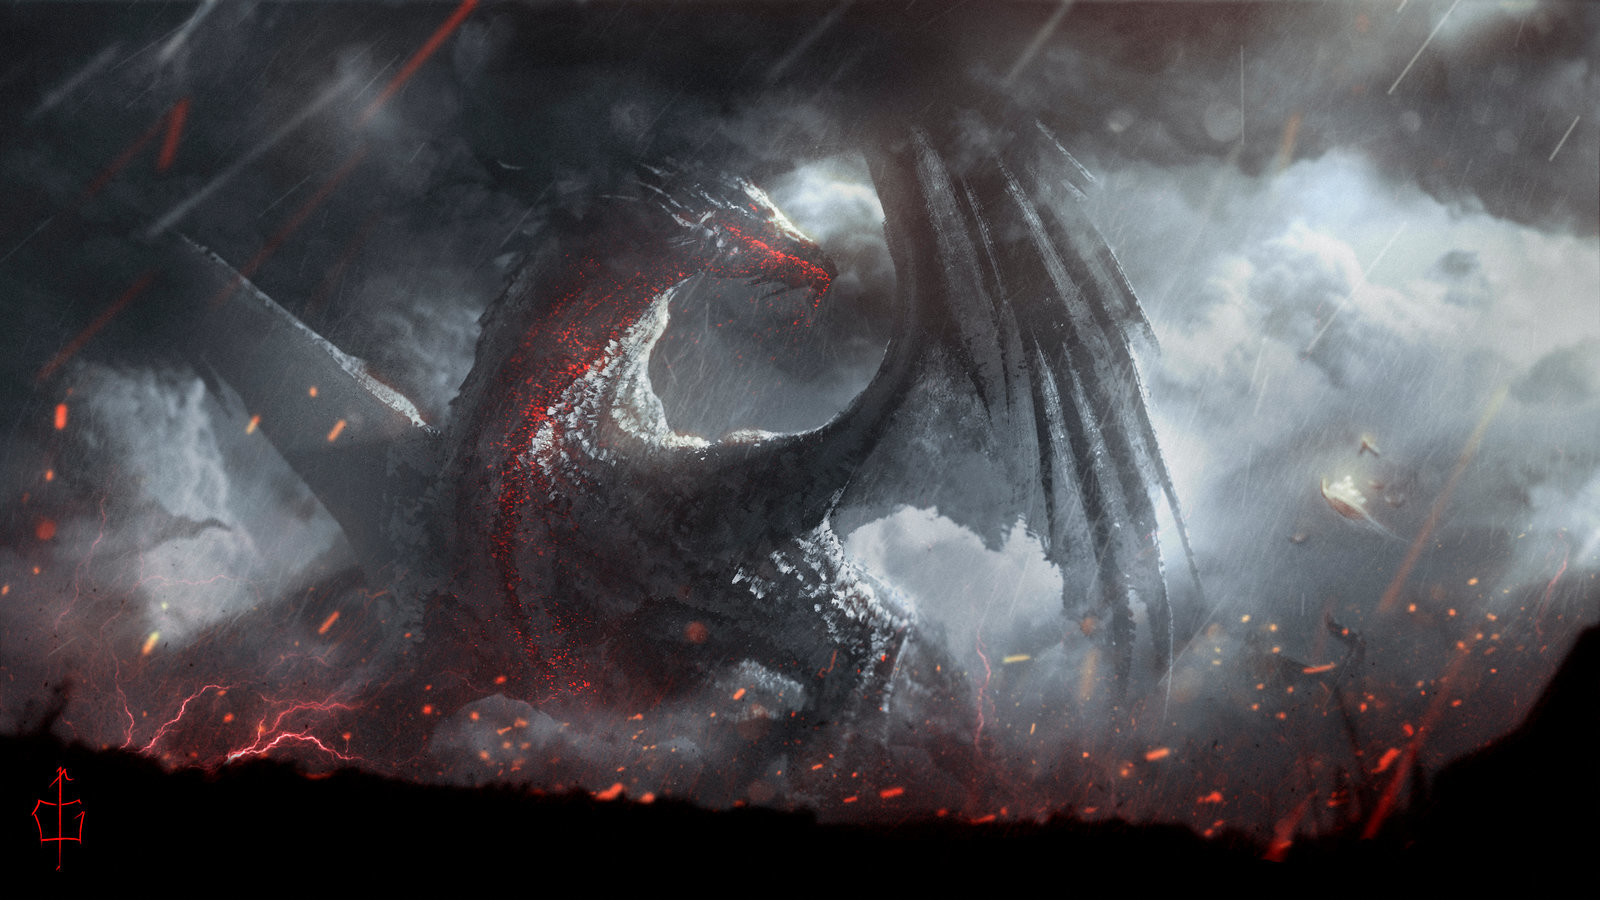 Lord of the Rings' Biggest Dragon Was Ancalagon, Not Smaug